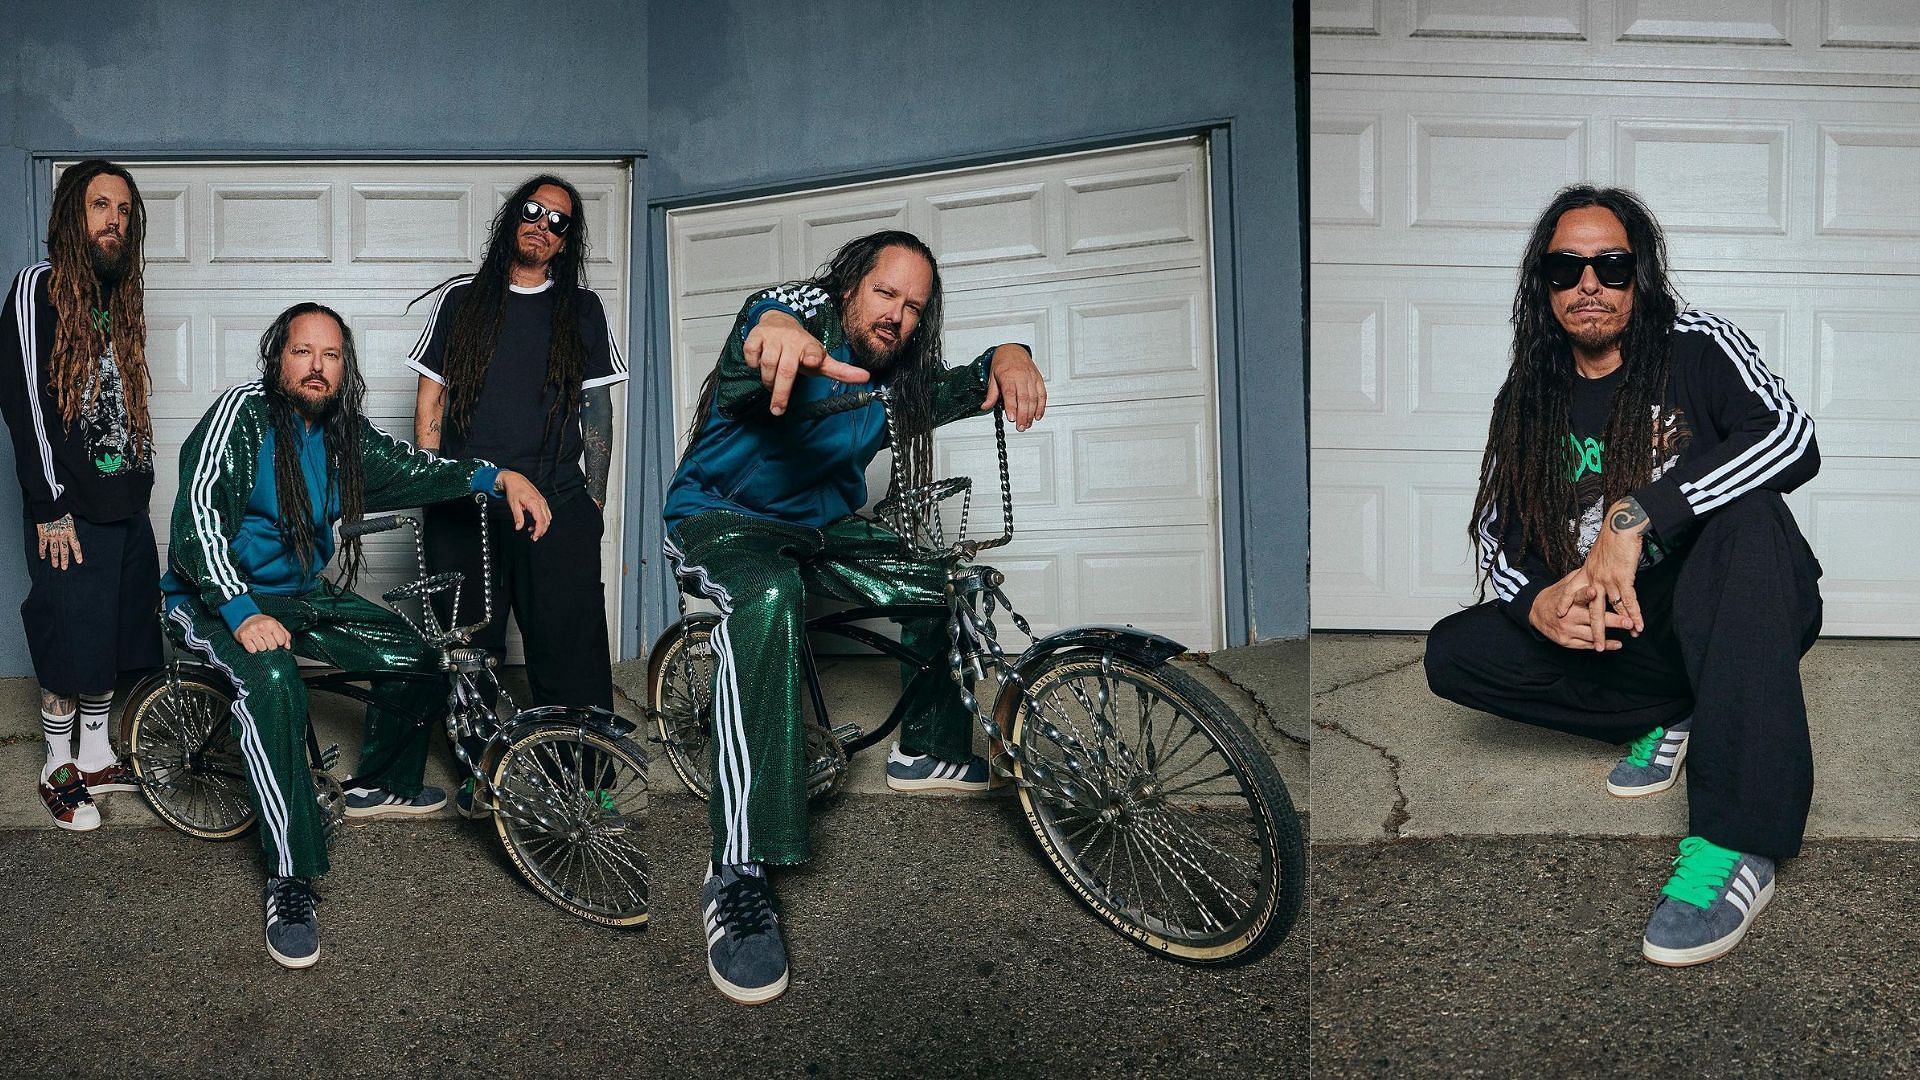 KoRn x Adidas to launch their second collection